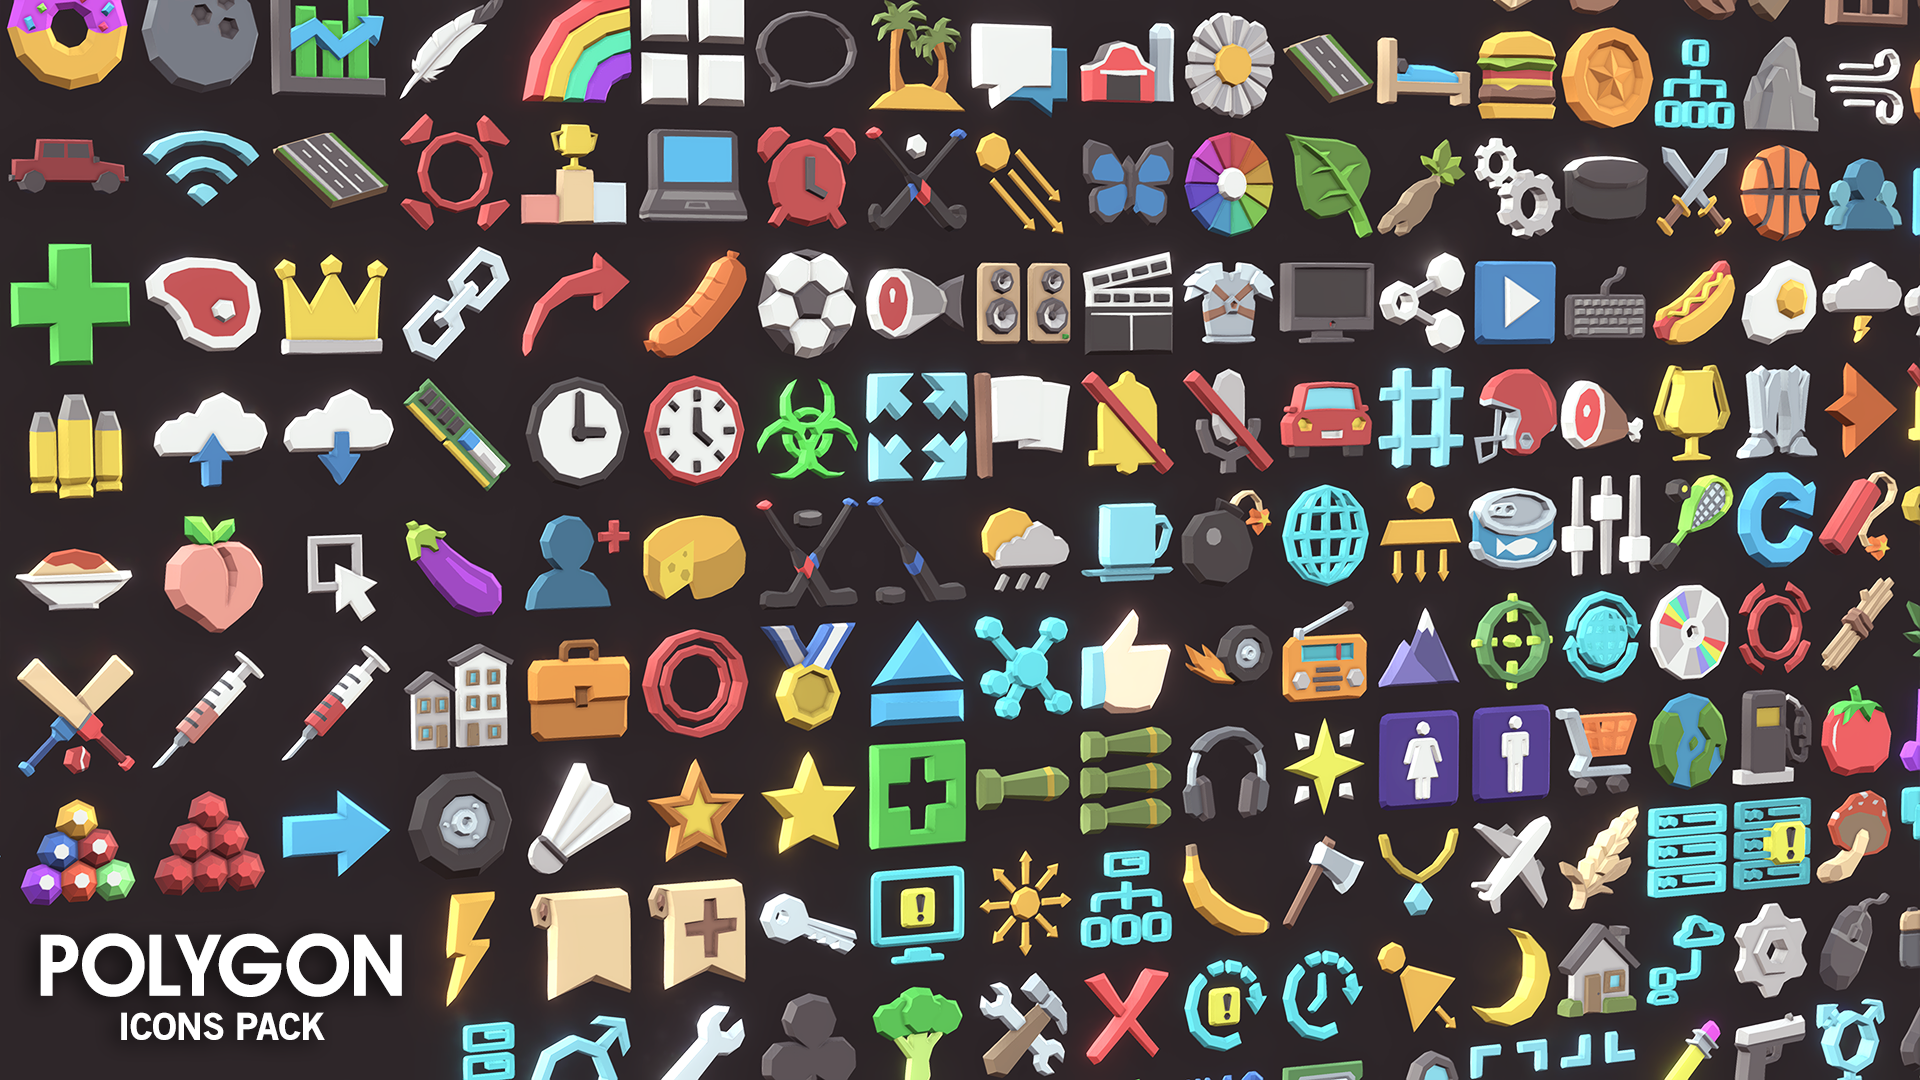 Low poly icons asset pack for game developers